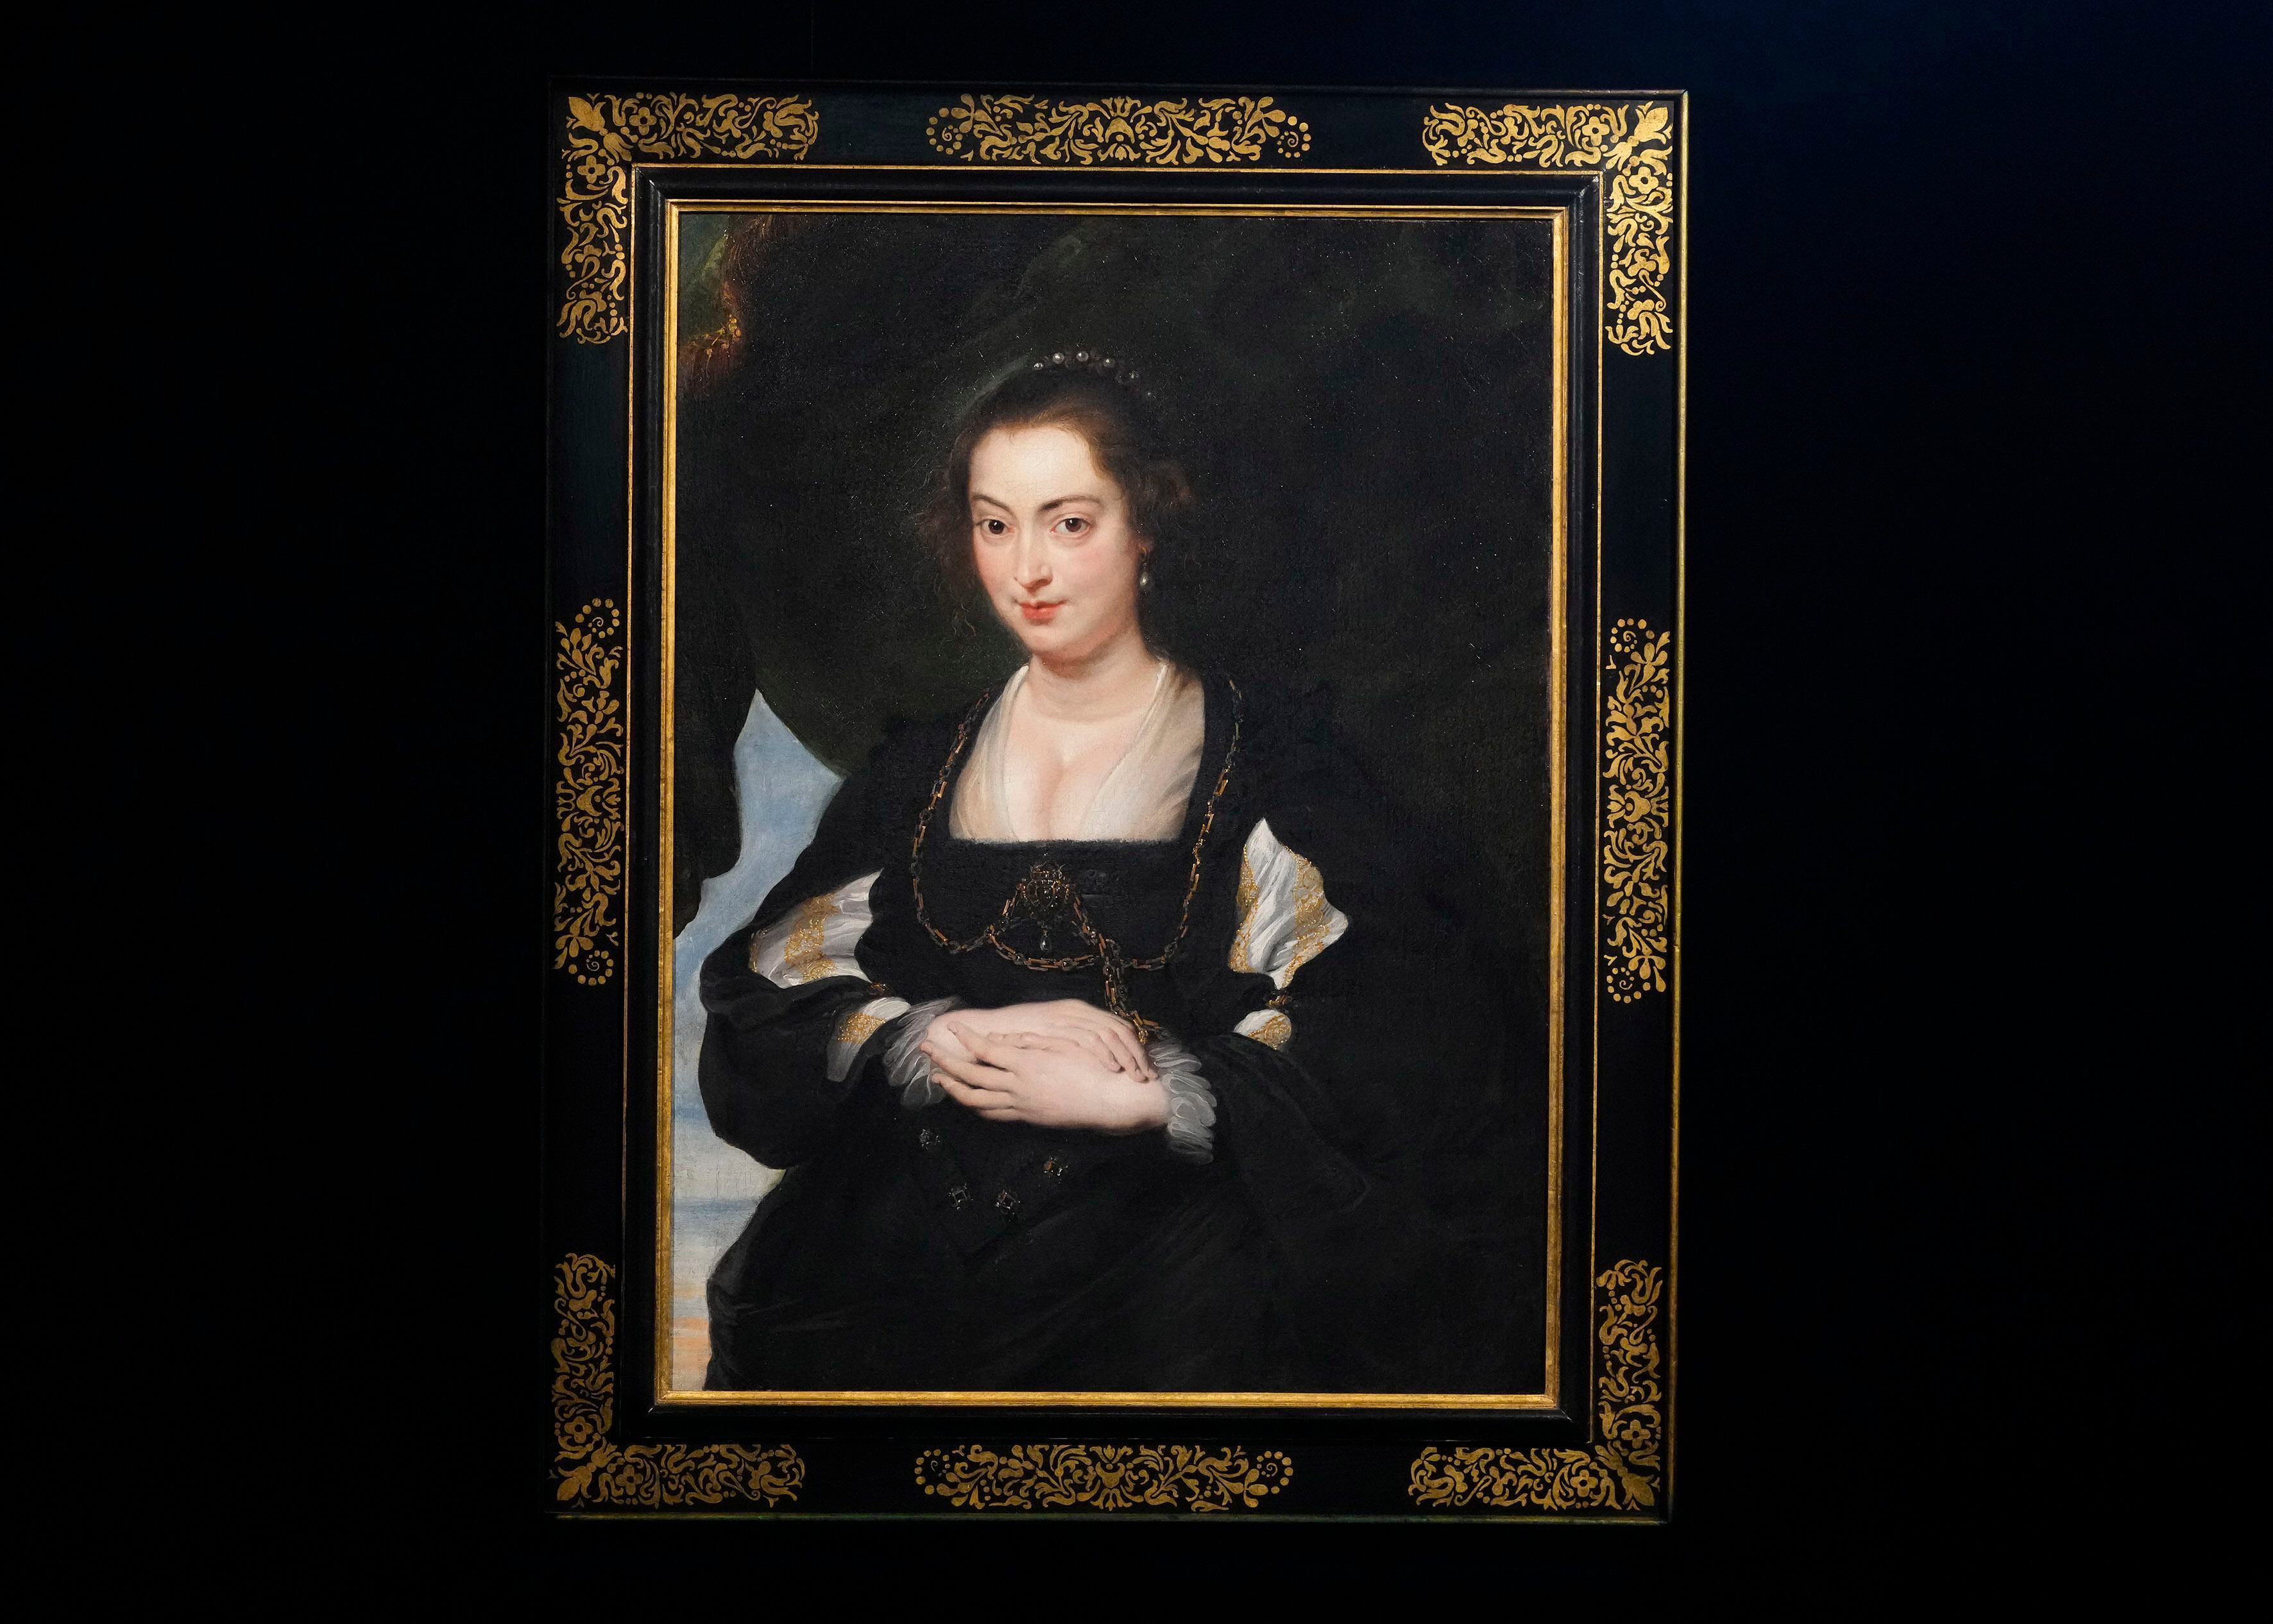 Rubens’ ‘Portrait of a Lady’ sells for $3.4 million